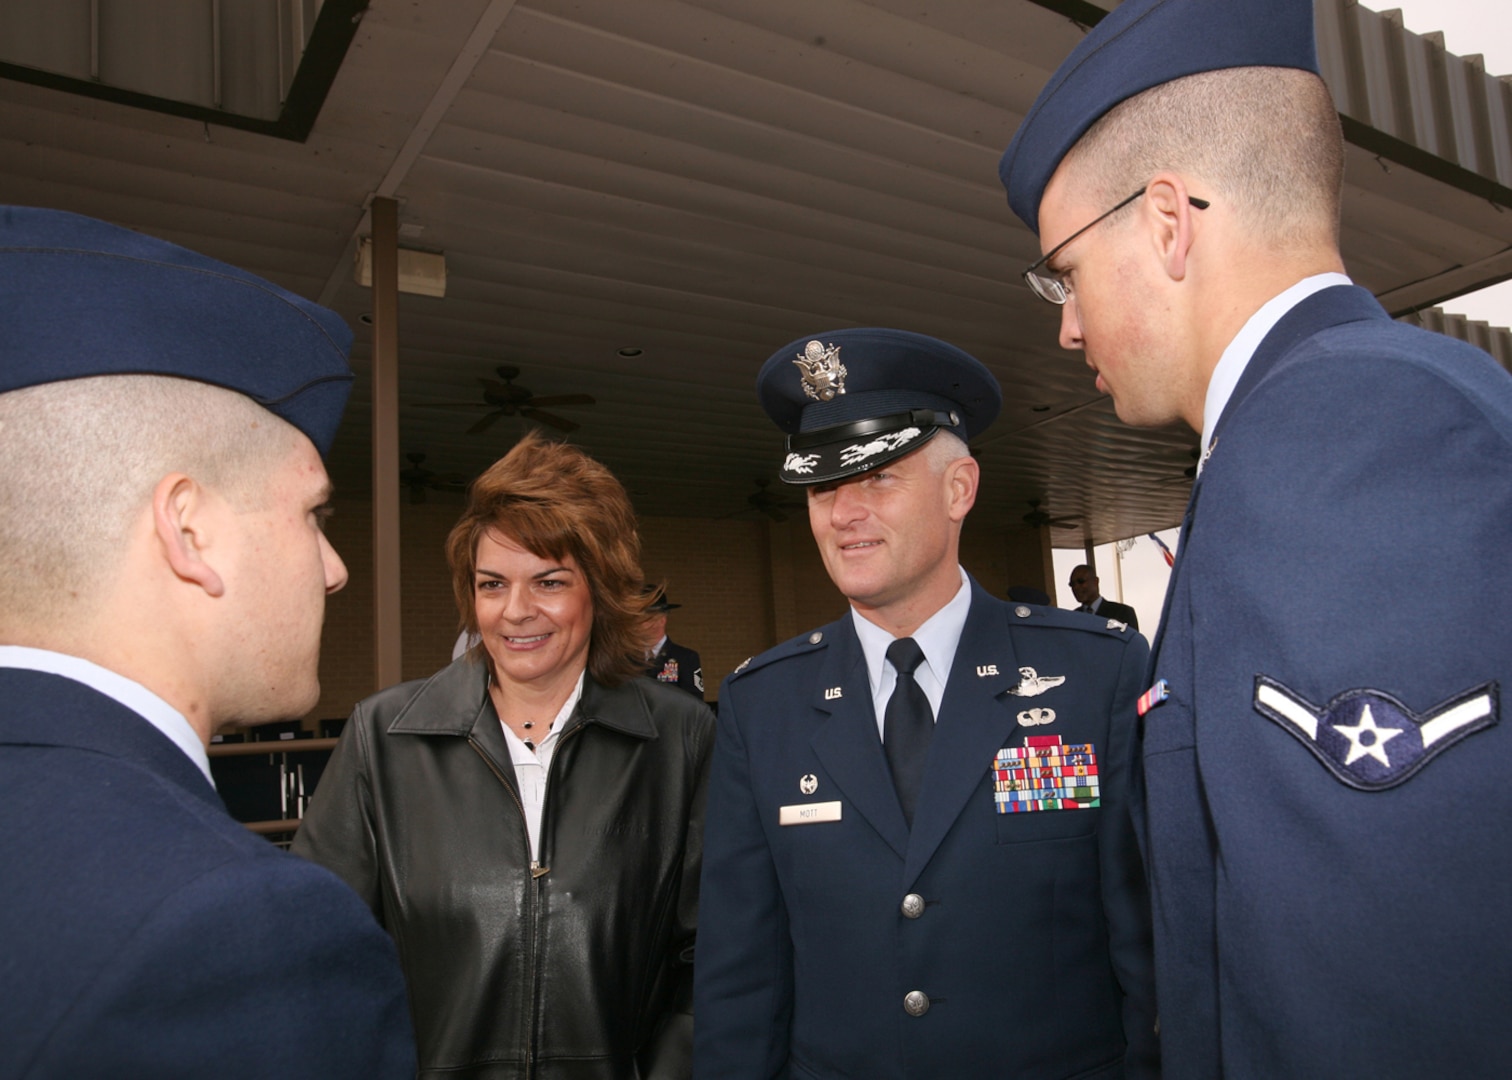 Col. William H. Mott V, 37th Training Wing commander, and his wife Laurie, speak with graduates of Air Force Basic Military Training Jan. 22. Colonel Mott took command of the 37th TRW in July 2009. (U.S. Air Force photo/Robbin Cresswell)  